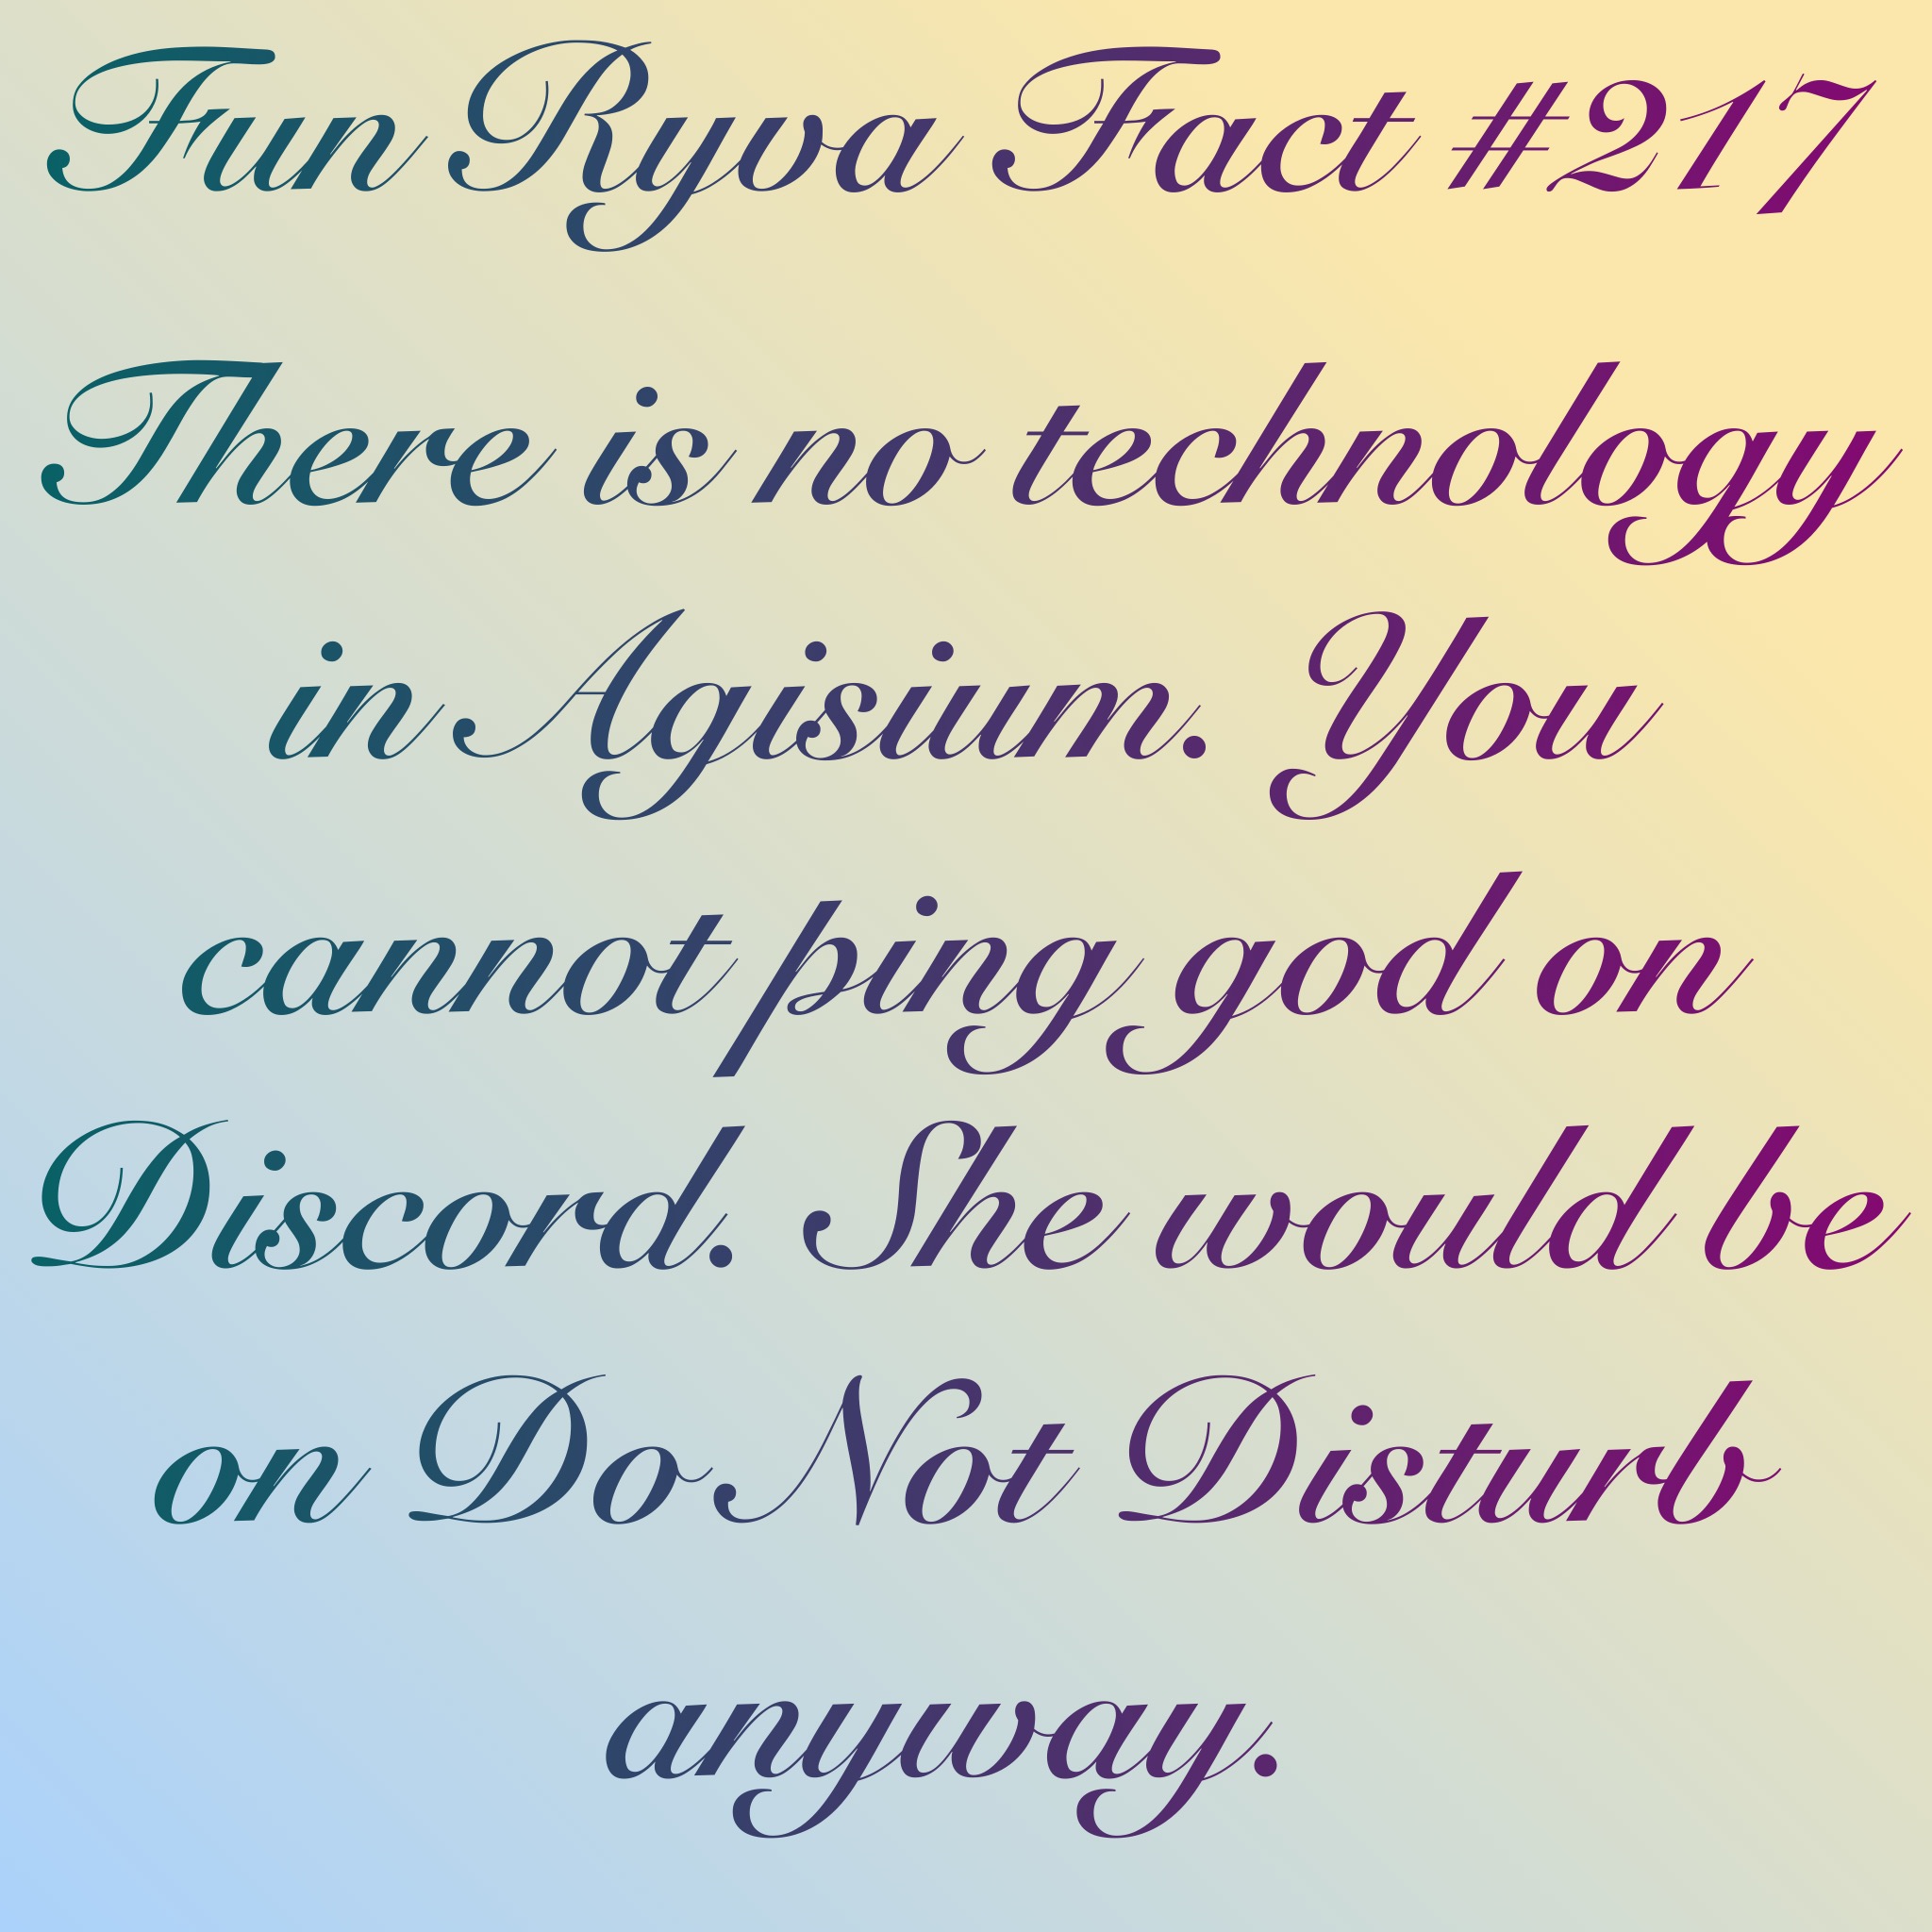 A meme reading "Fun Ryva Fact #217" above text reading "There is no technology in Agisium. You cannot ping god on Discord. She would be on Do Not Disturb anyway."